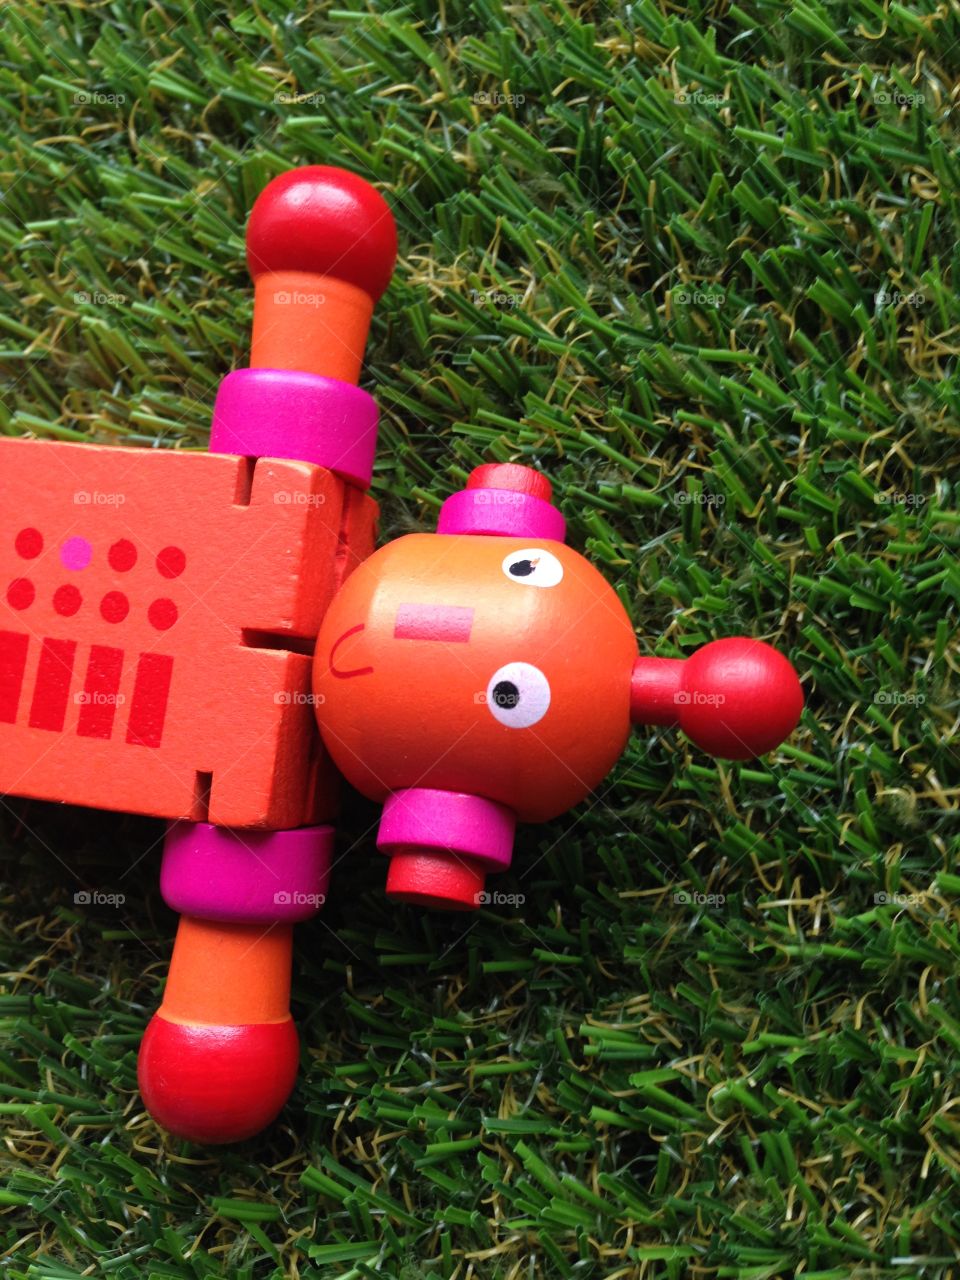 Red toy robot left on grass 